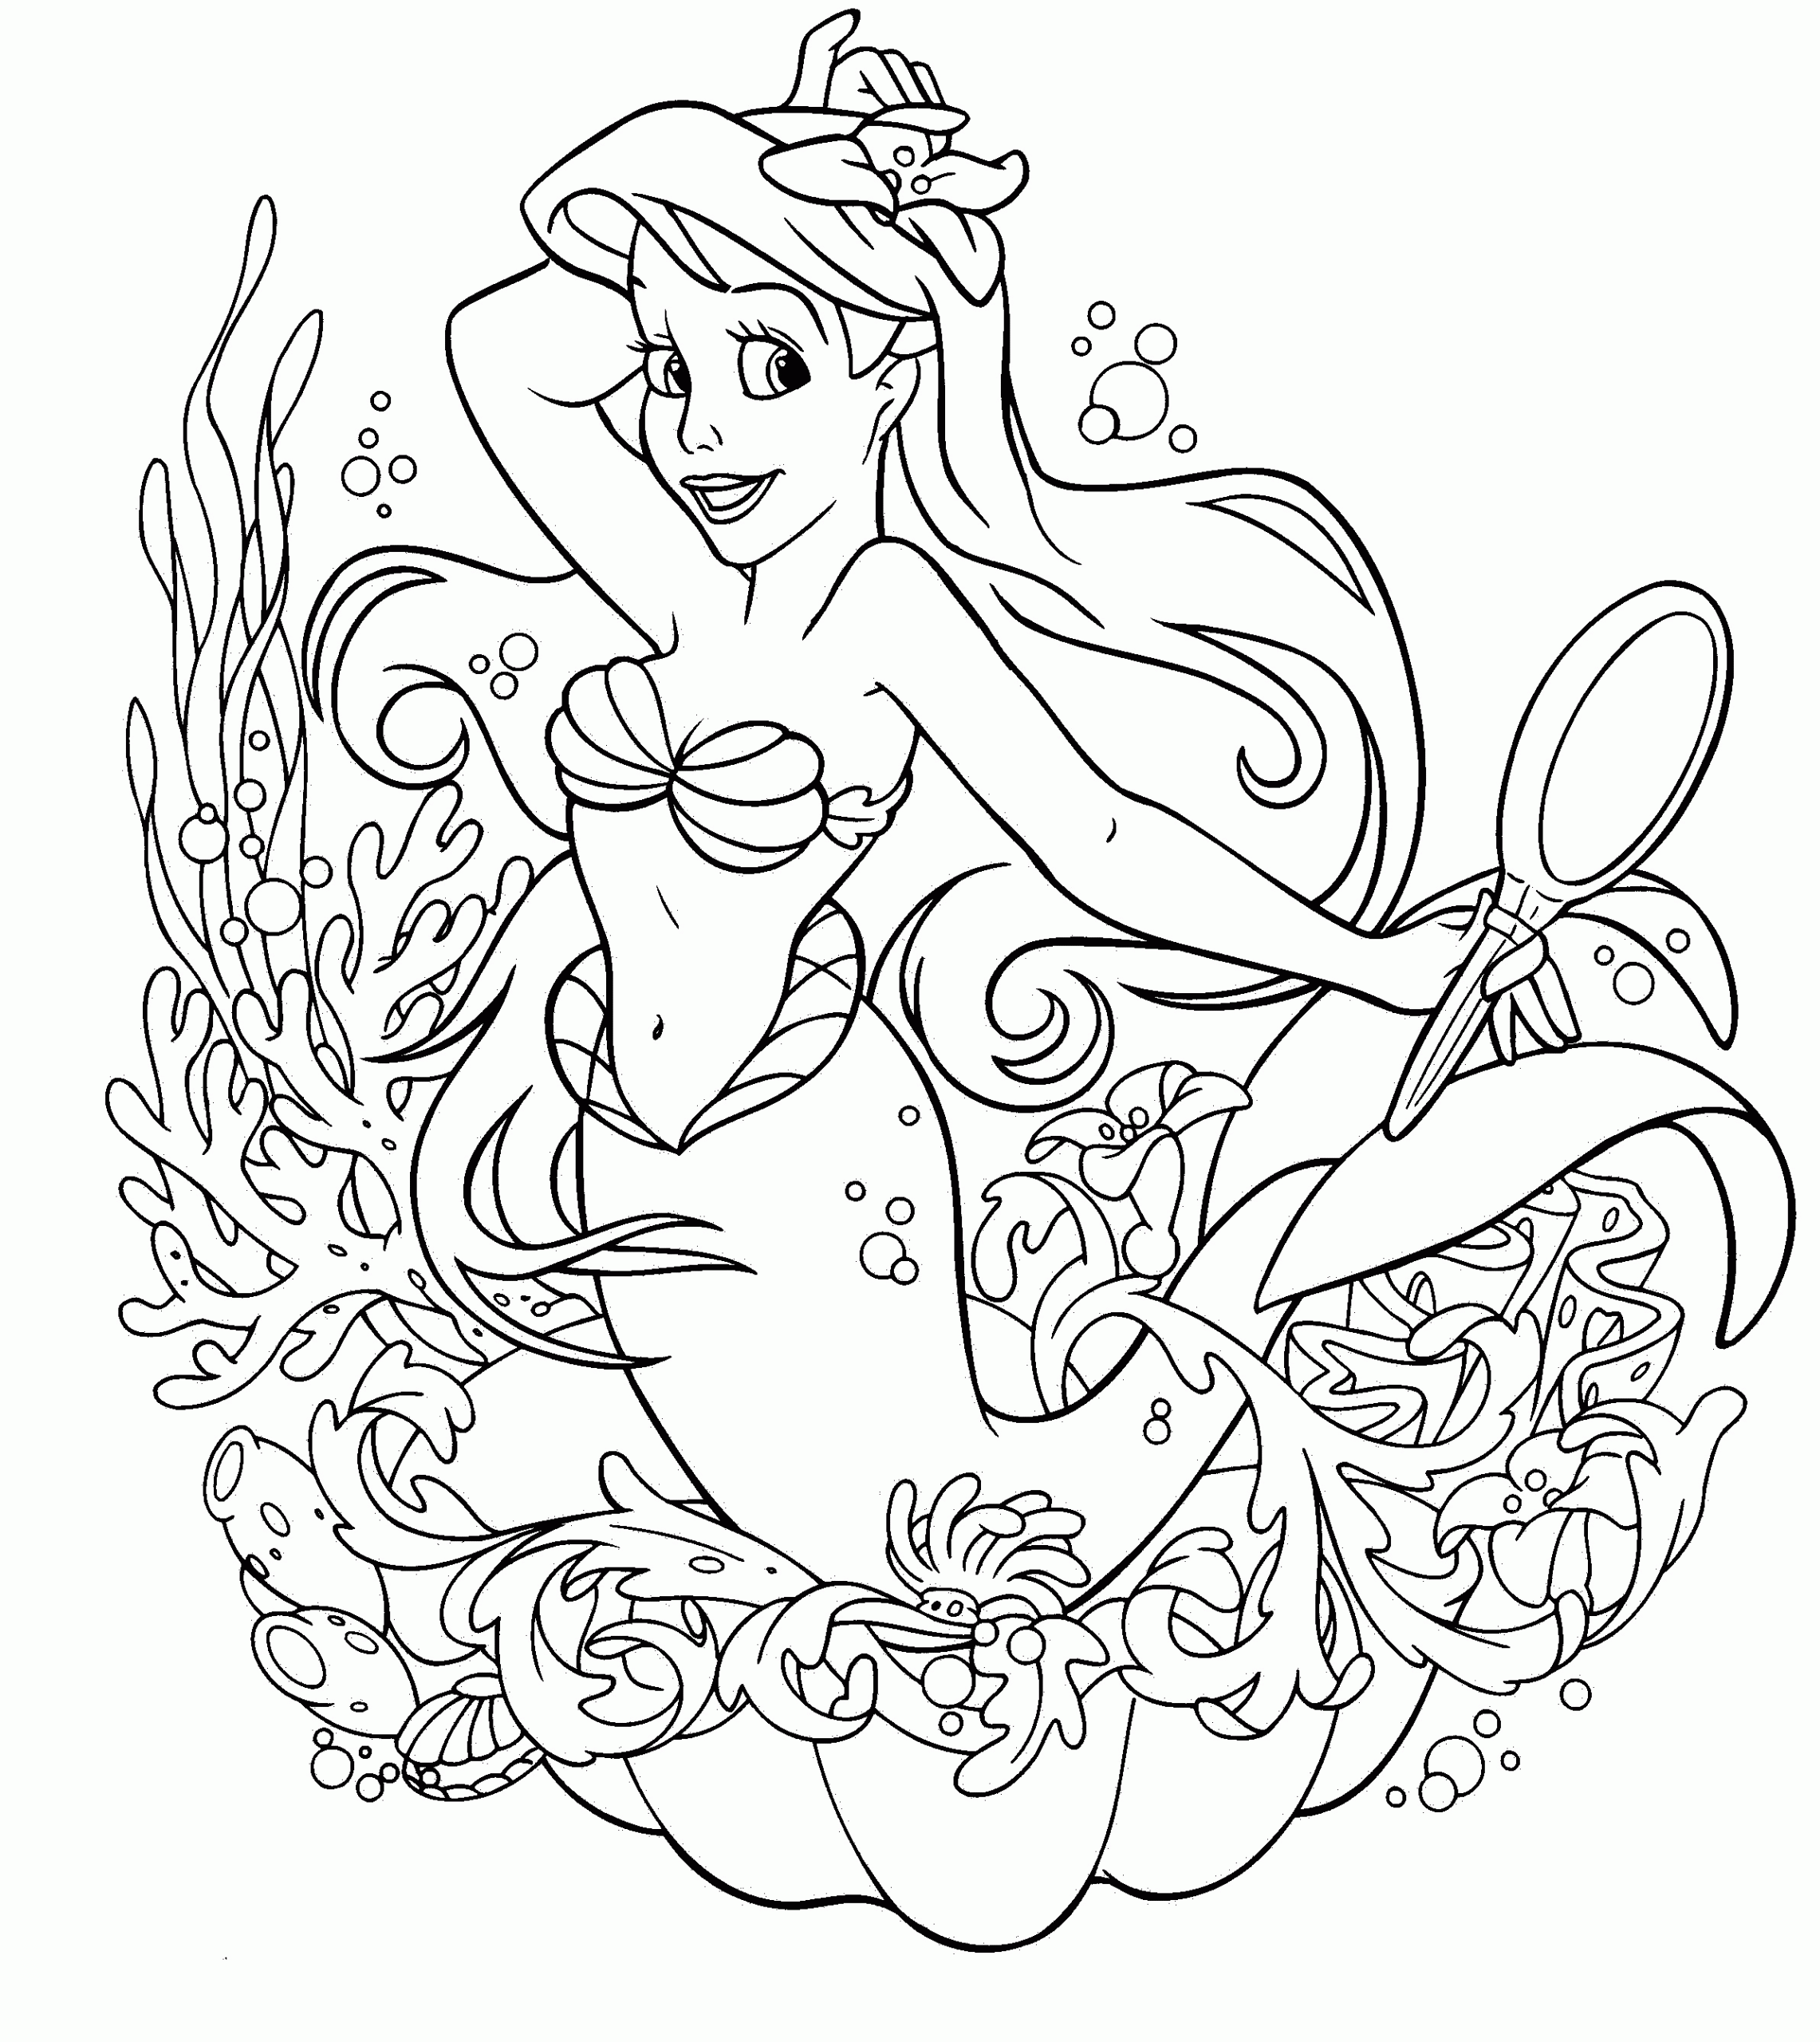 Coloring Pages Disney For Girls
 1000 images about Colouring on Pinterest